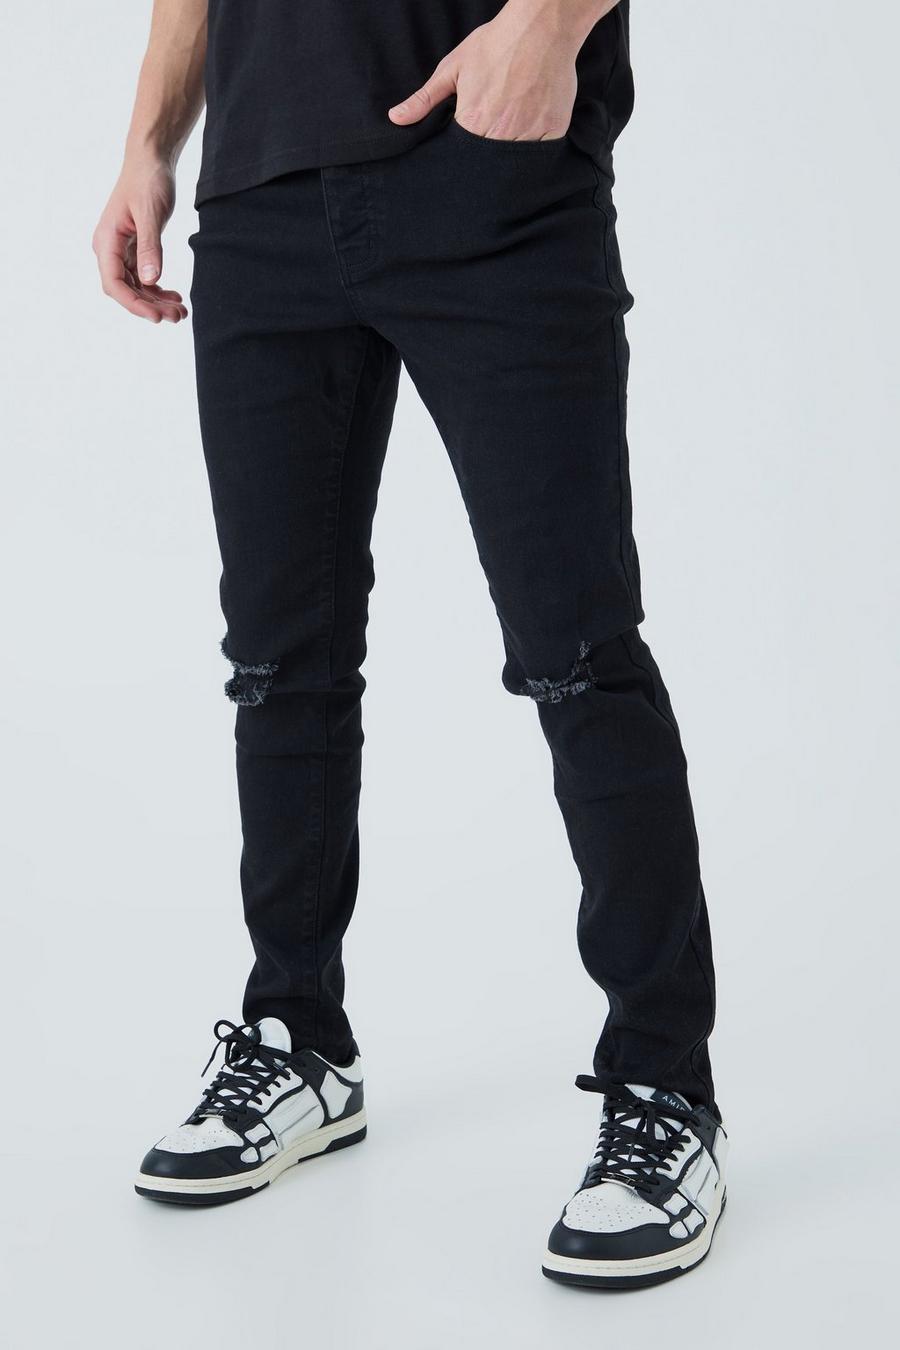 Black noir Skinny Jeans With Ripped Knees